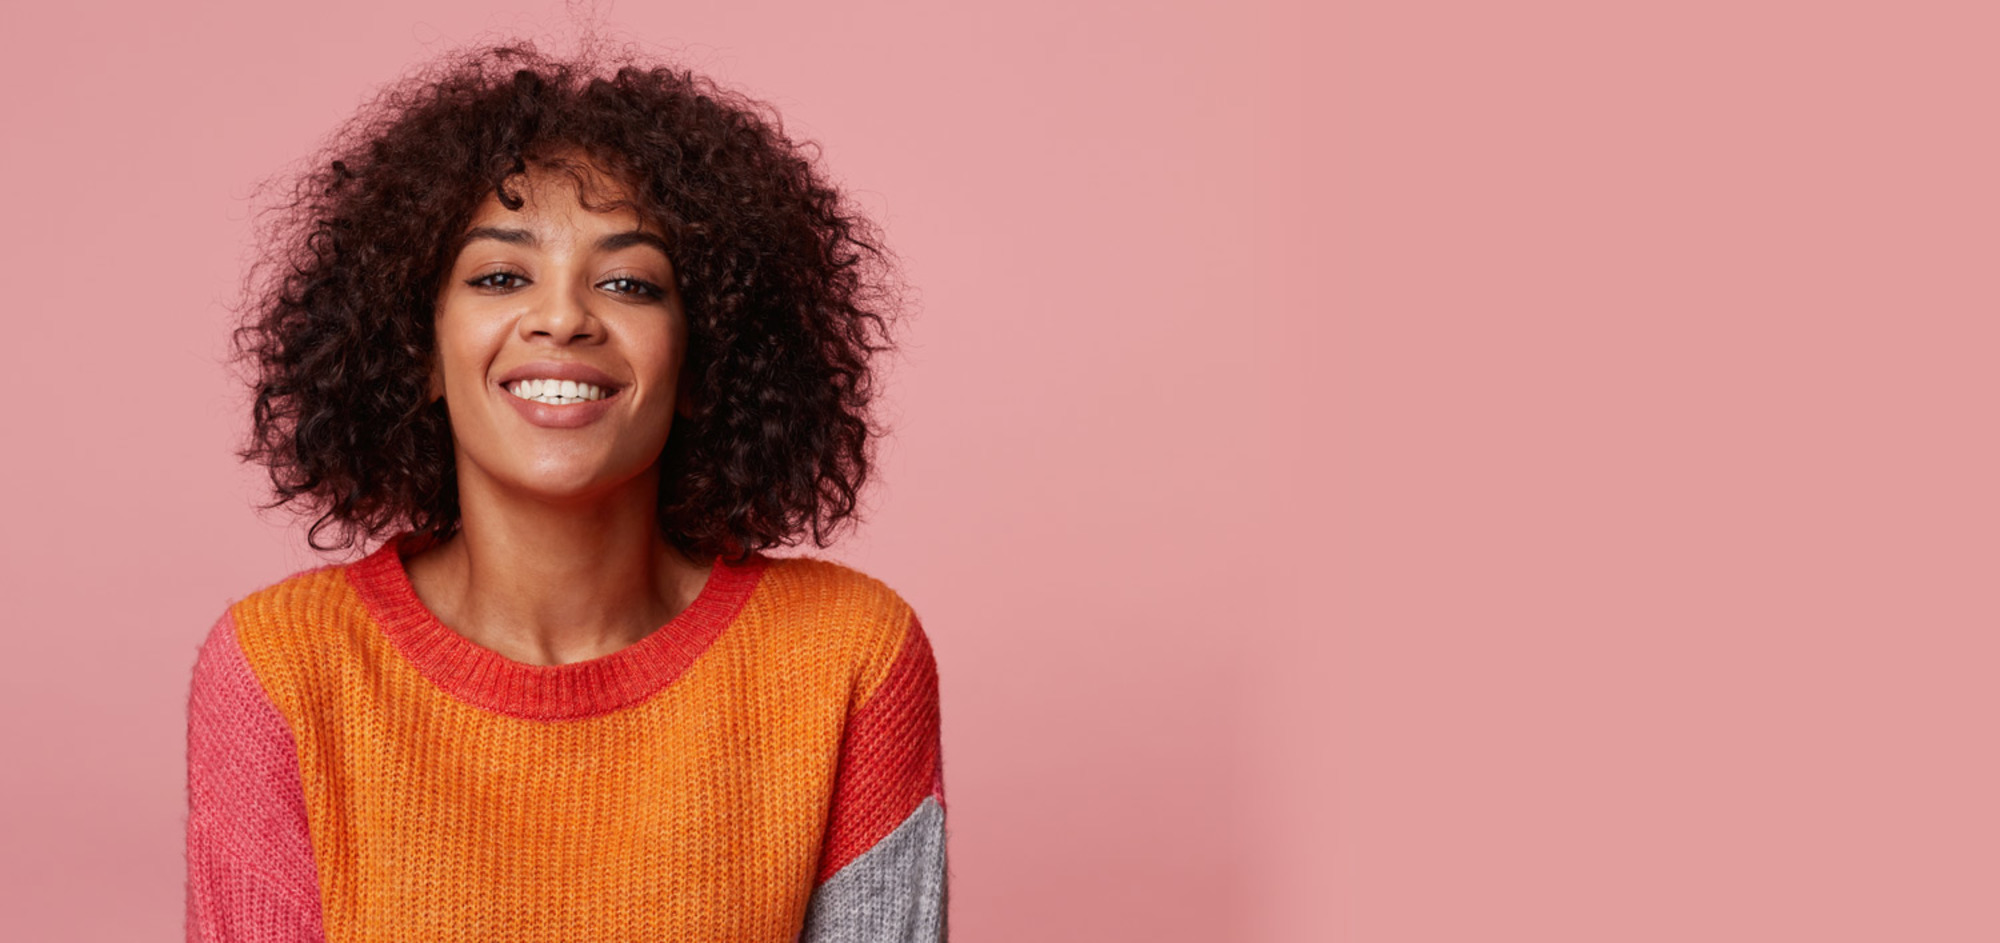 Positive Optimistic Charming Girl Looking Confident Joyful Afro Hairstyle Smile Wearing Colorful Longsleeve Pink Background